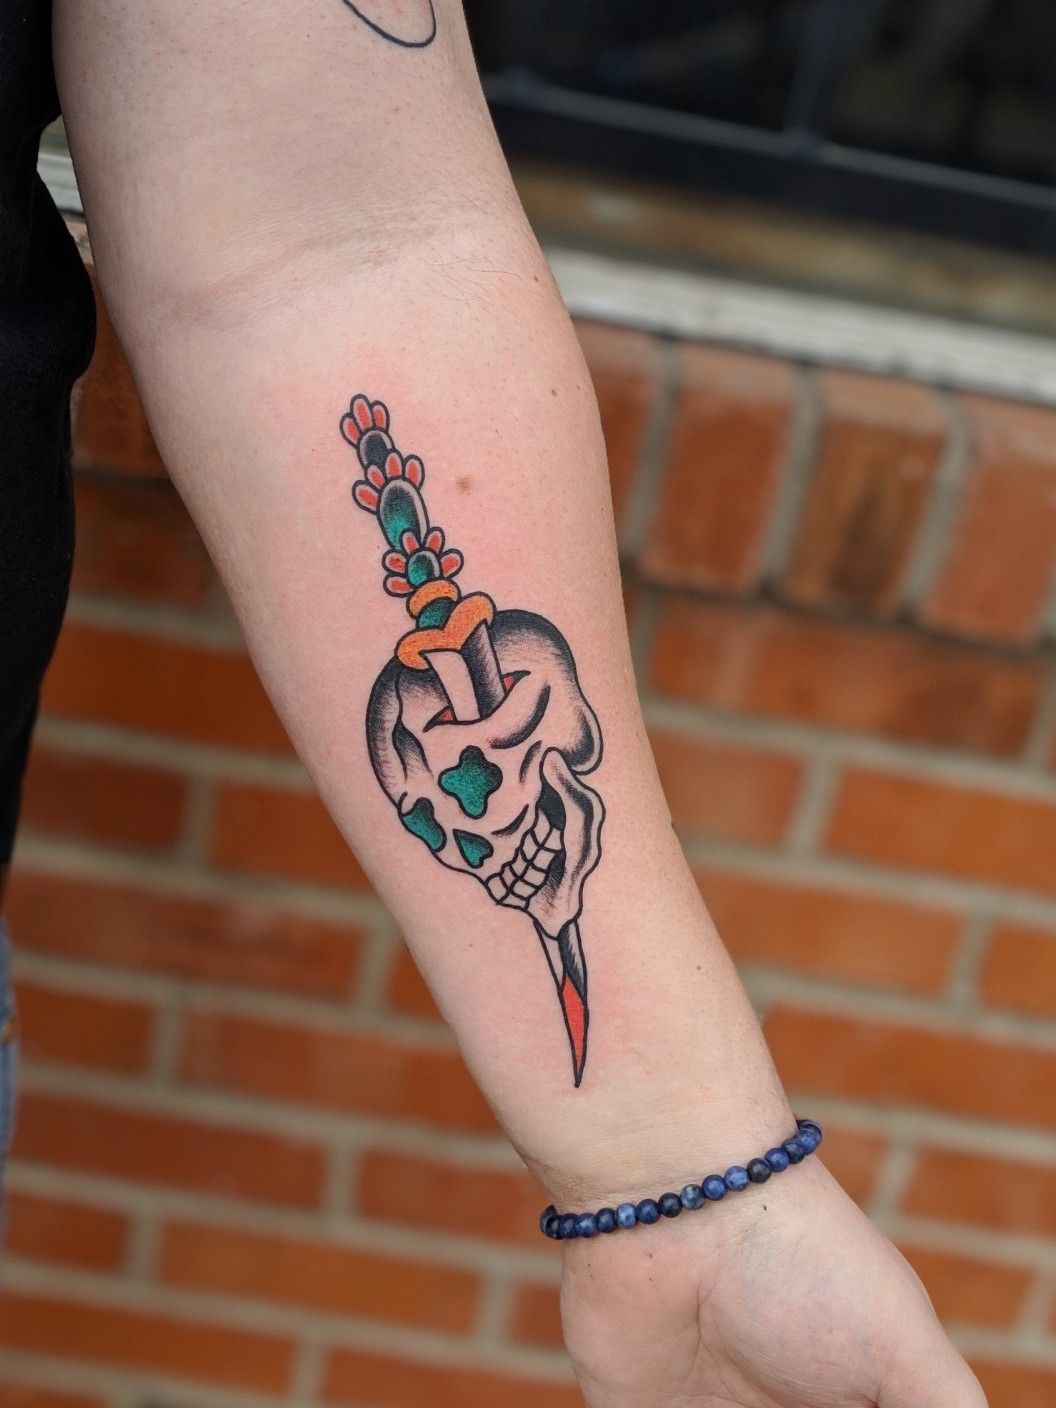 traditional skull and dagger